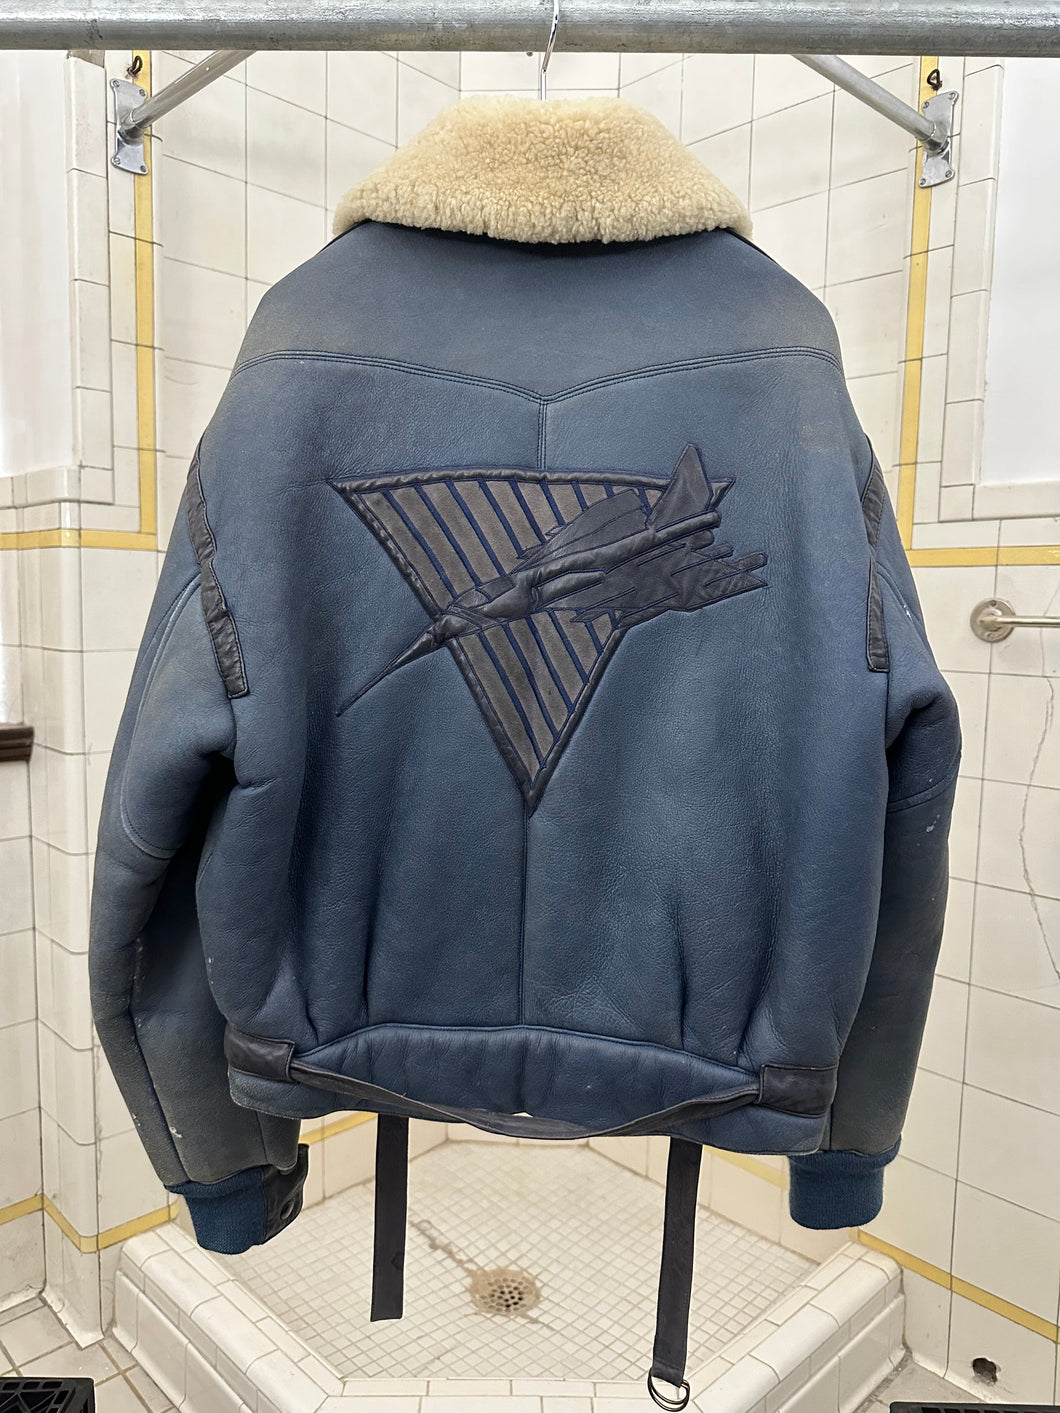 aw1983 Claude Montana Blue Fighter Jet Shearling Jacket - Size L